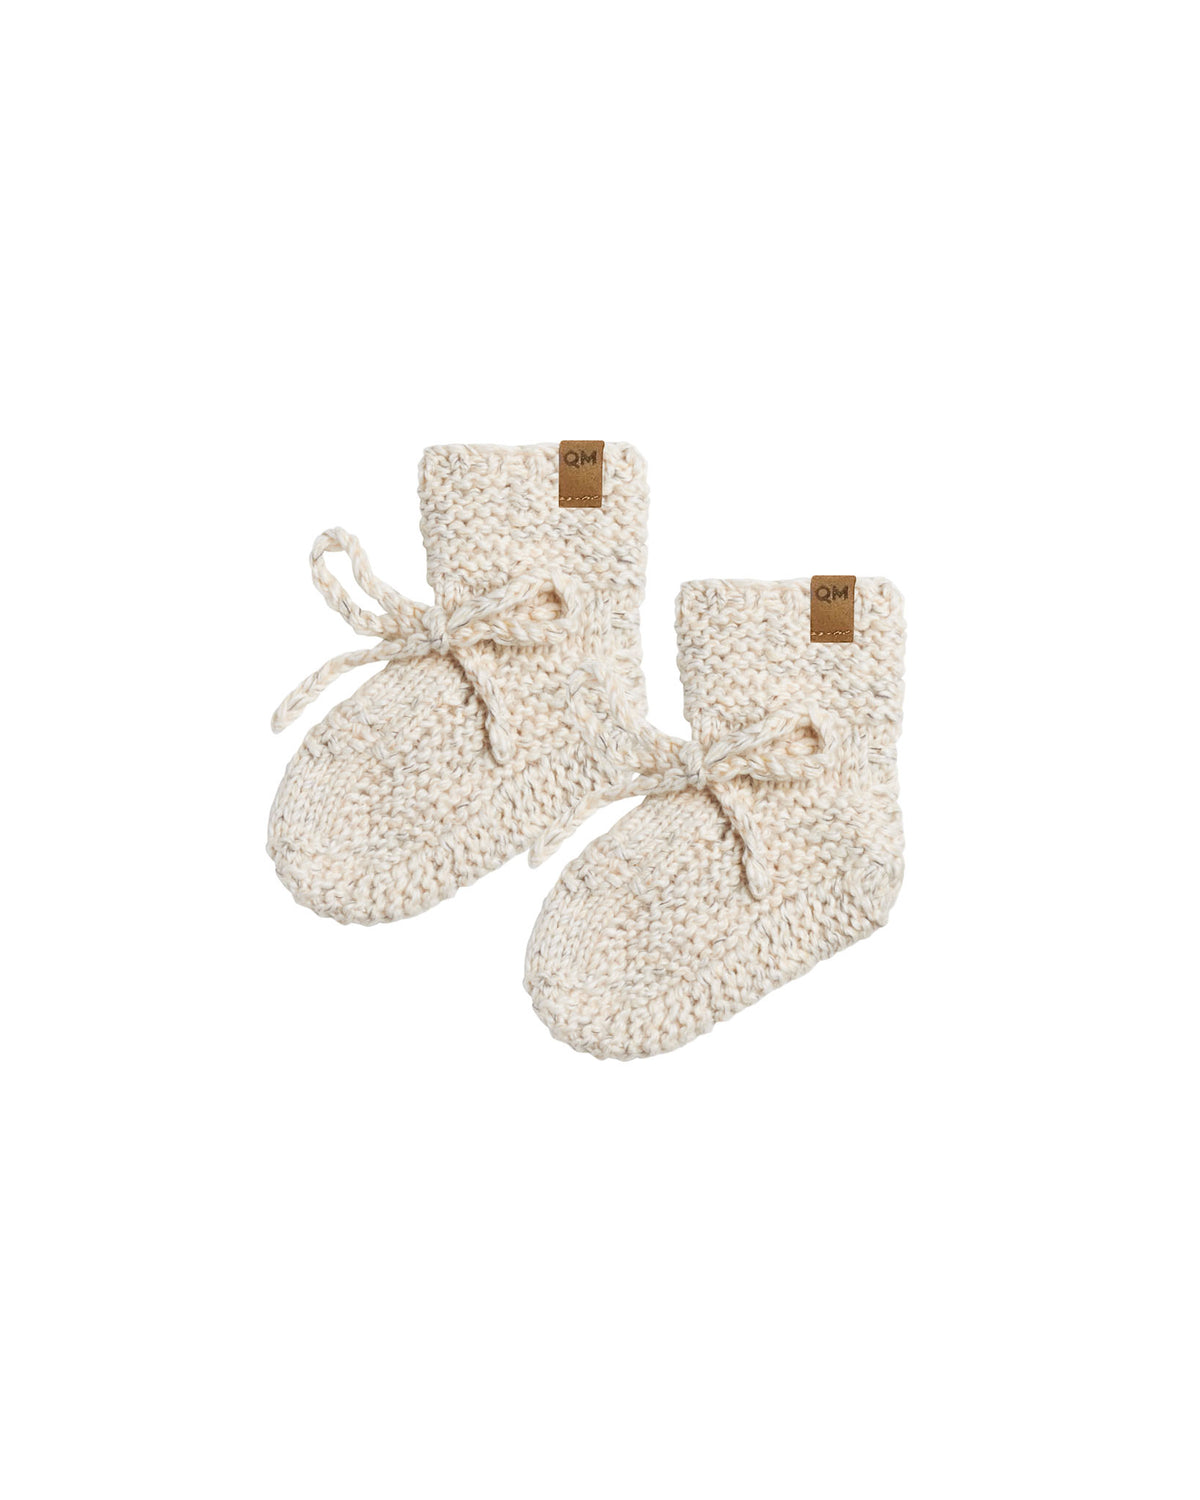 KNIT BOOTIES || NATURAL SPECKLED